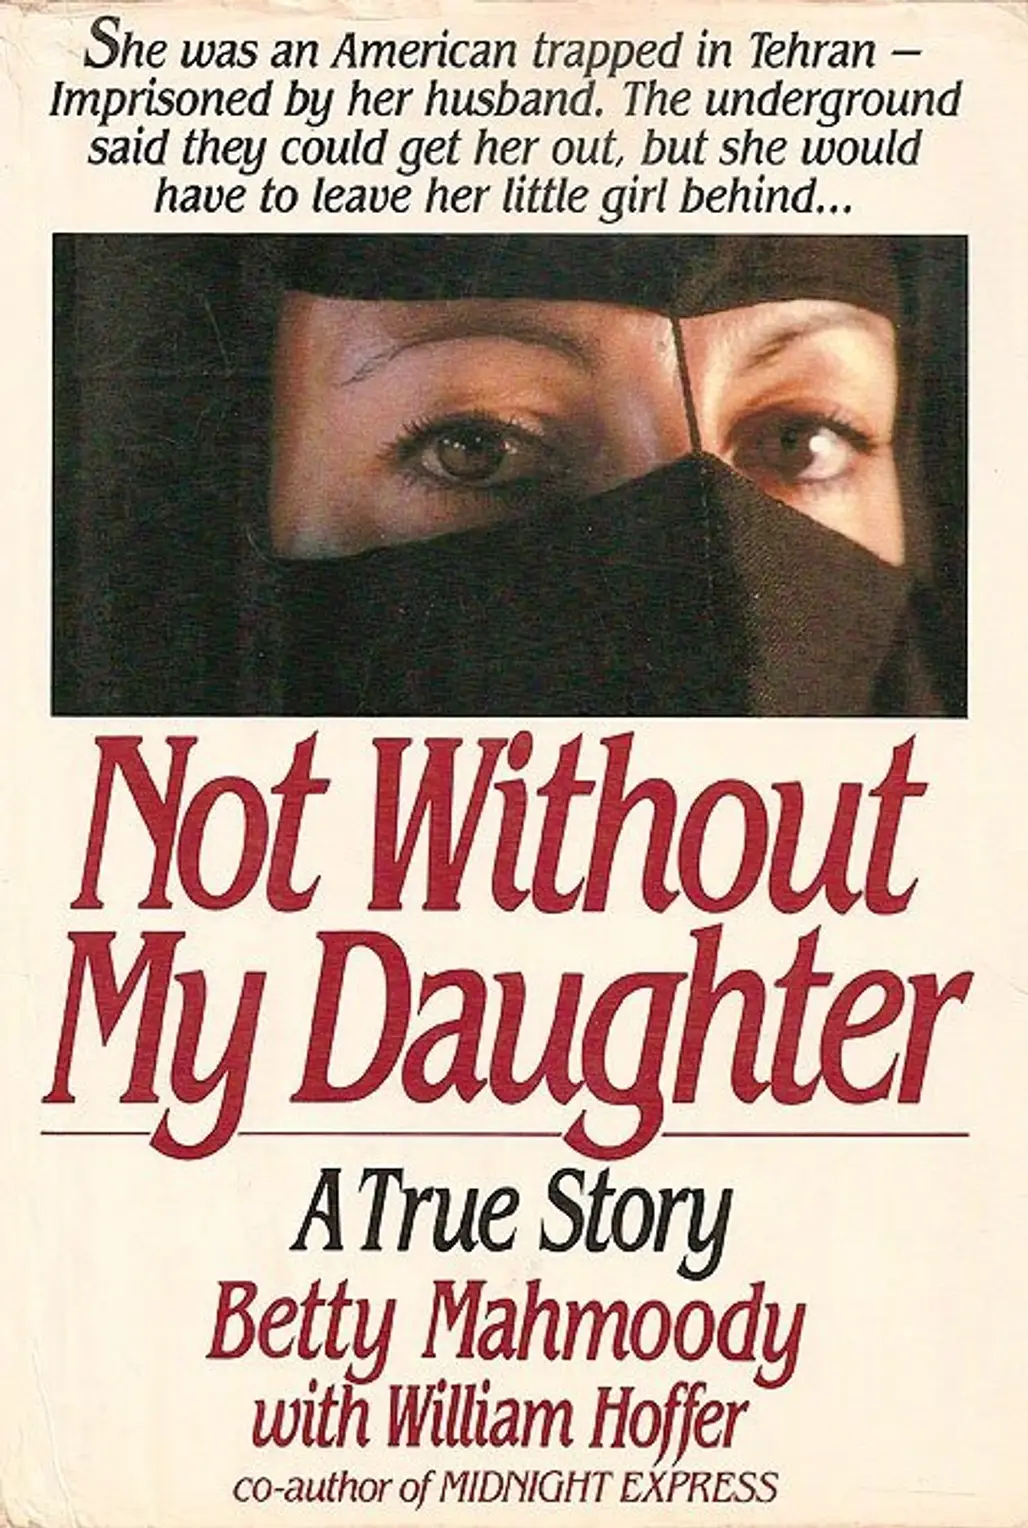 Not without My Daughter by Betty Mahmoody